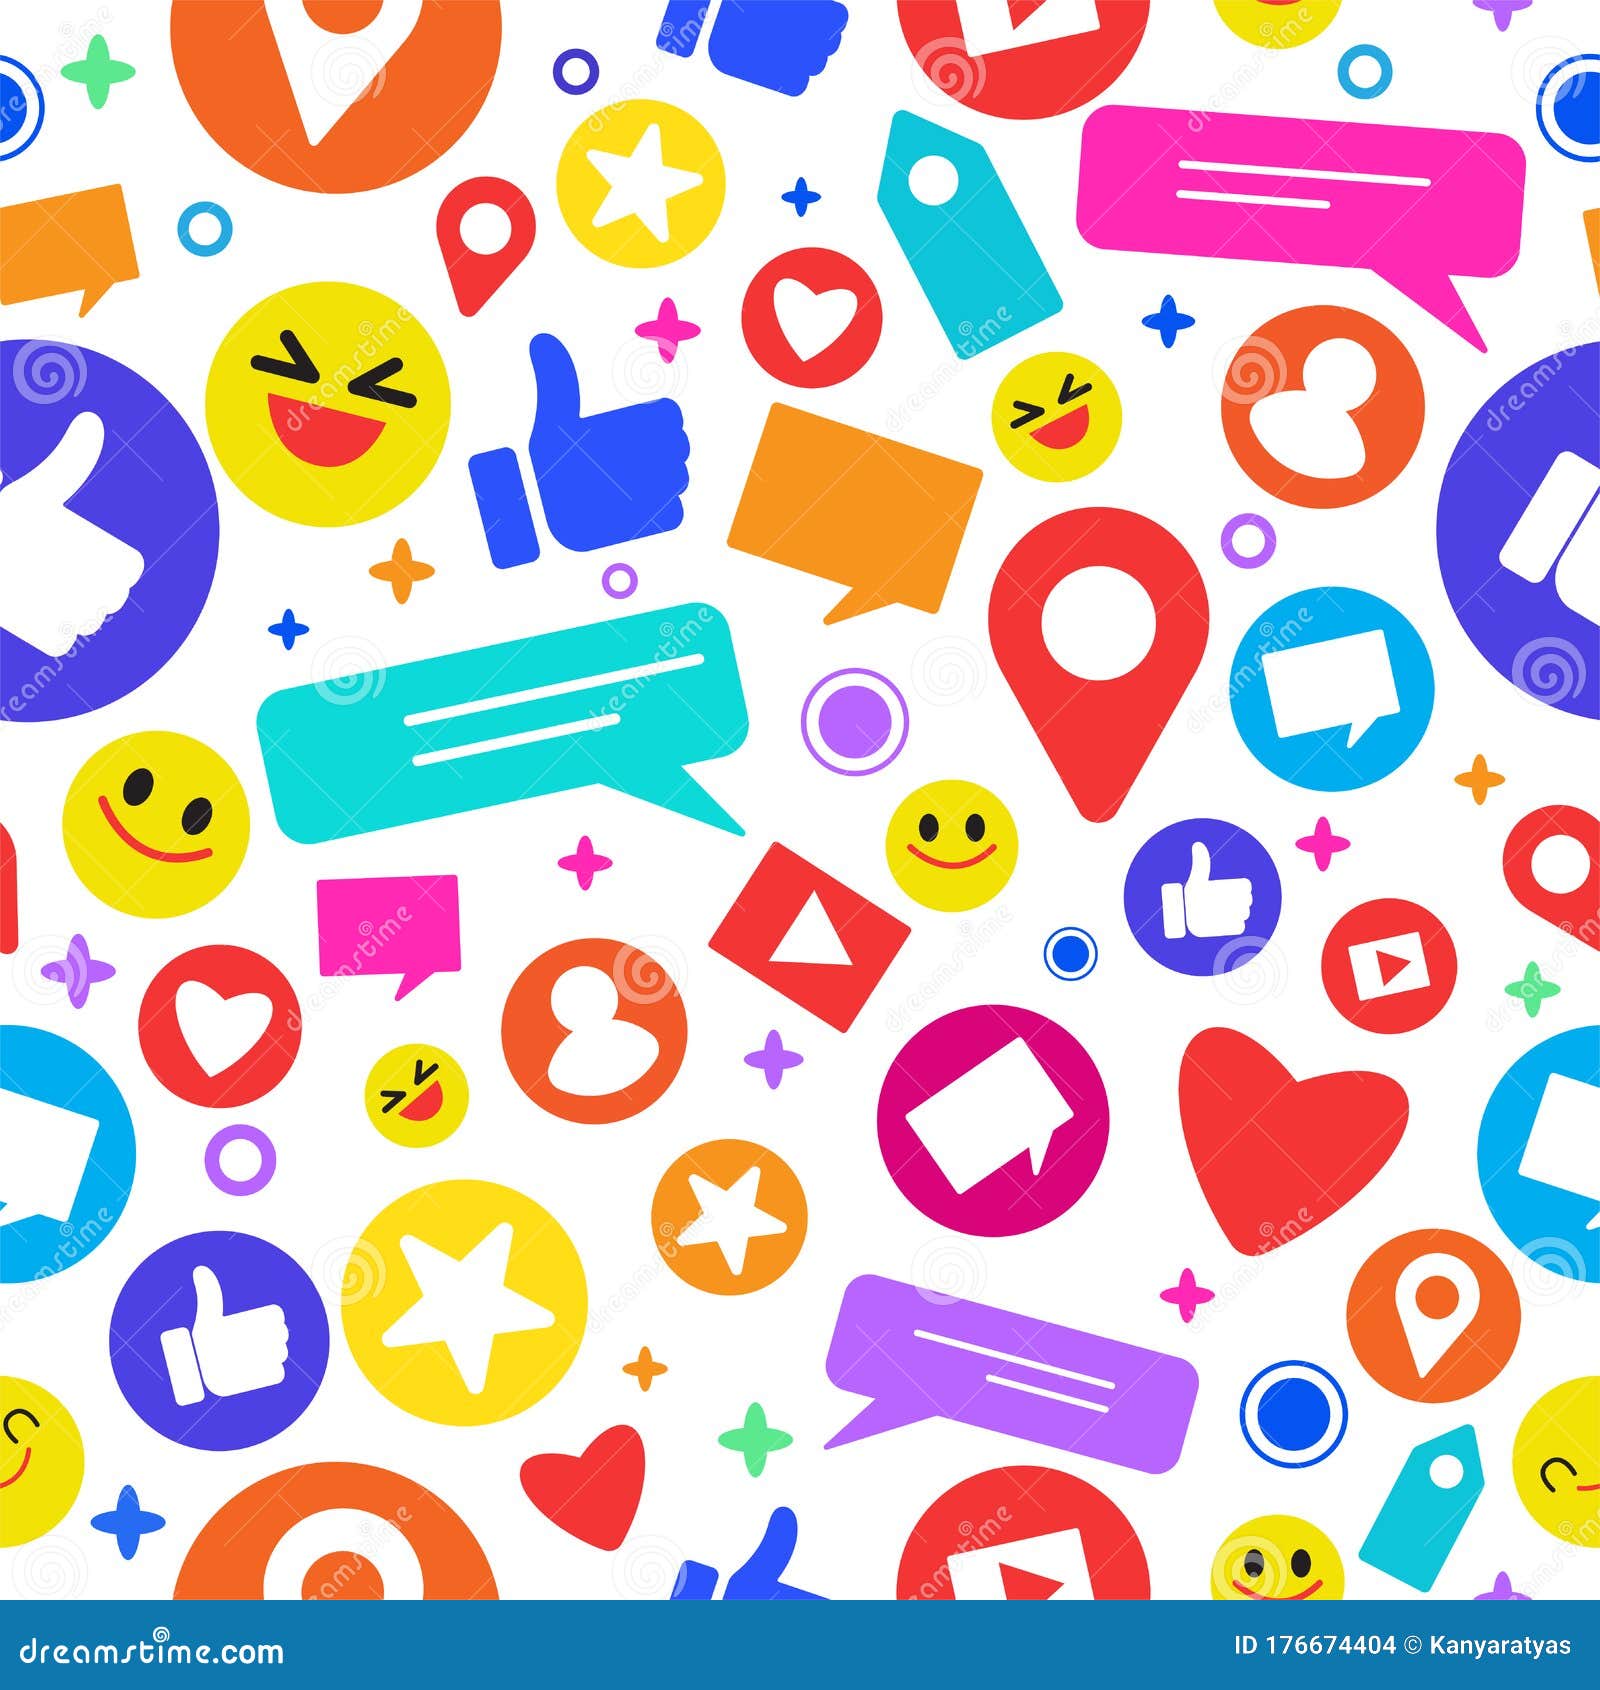 Cute Social Network Icons Seamless Background,vector Illustration ...